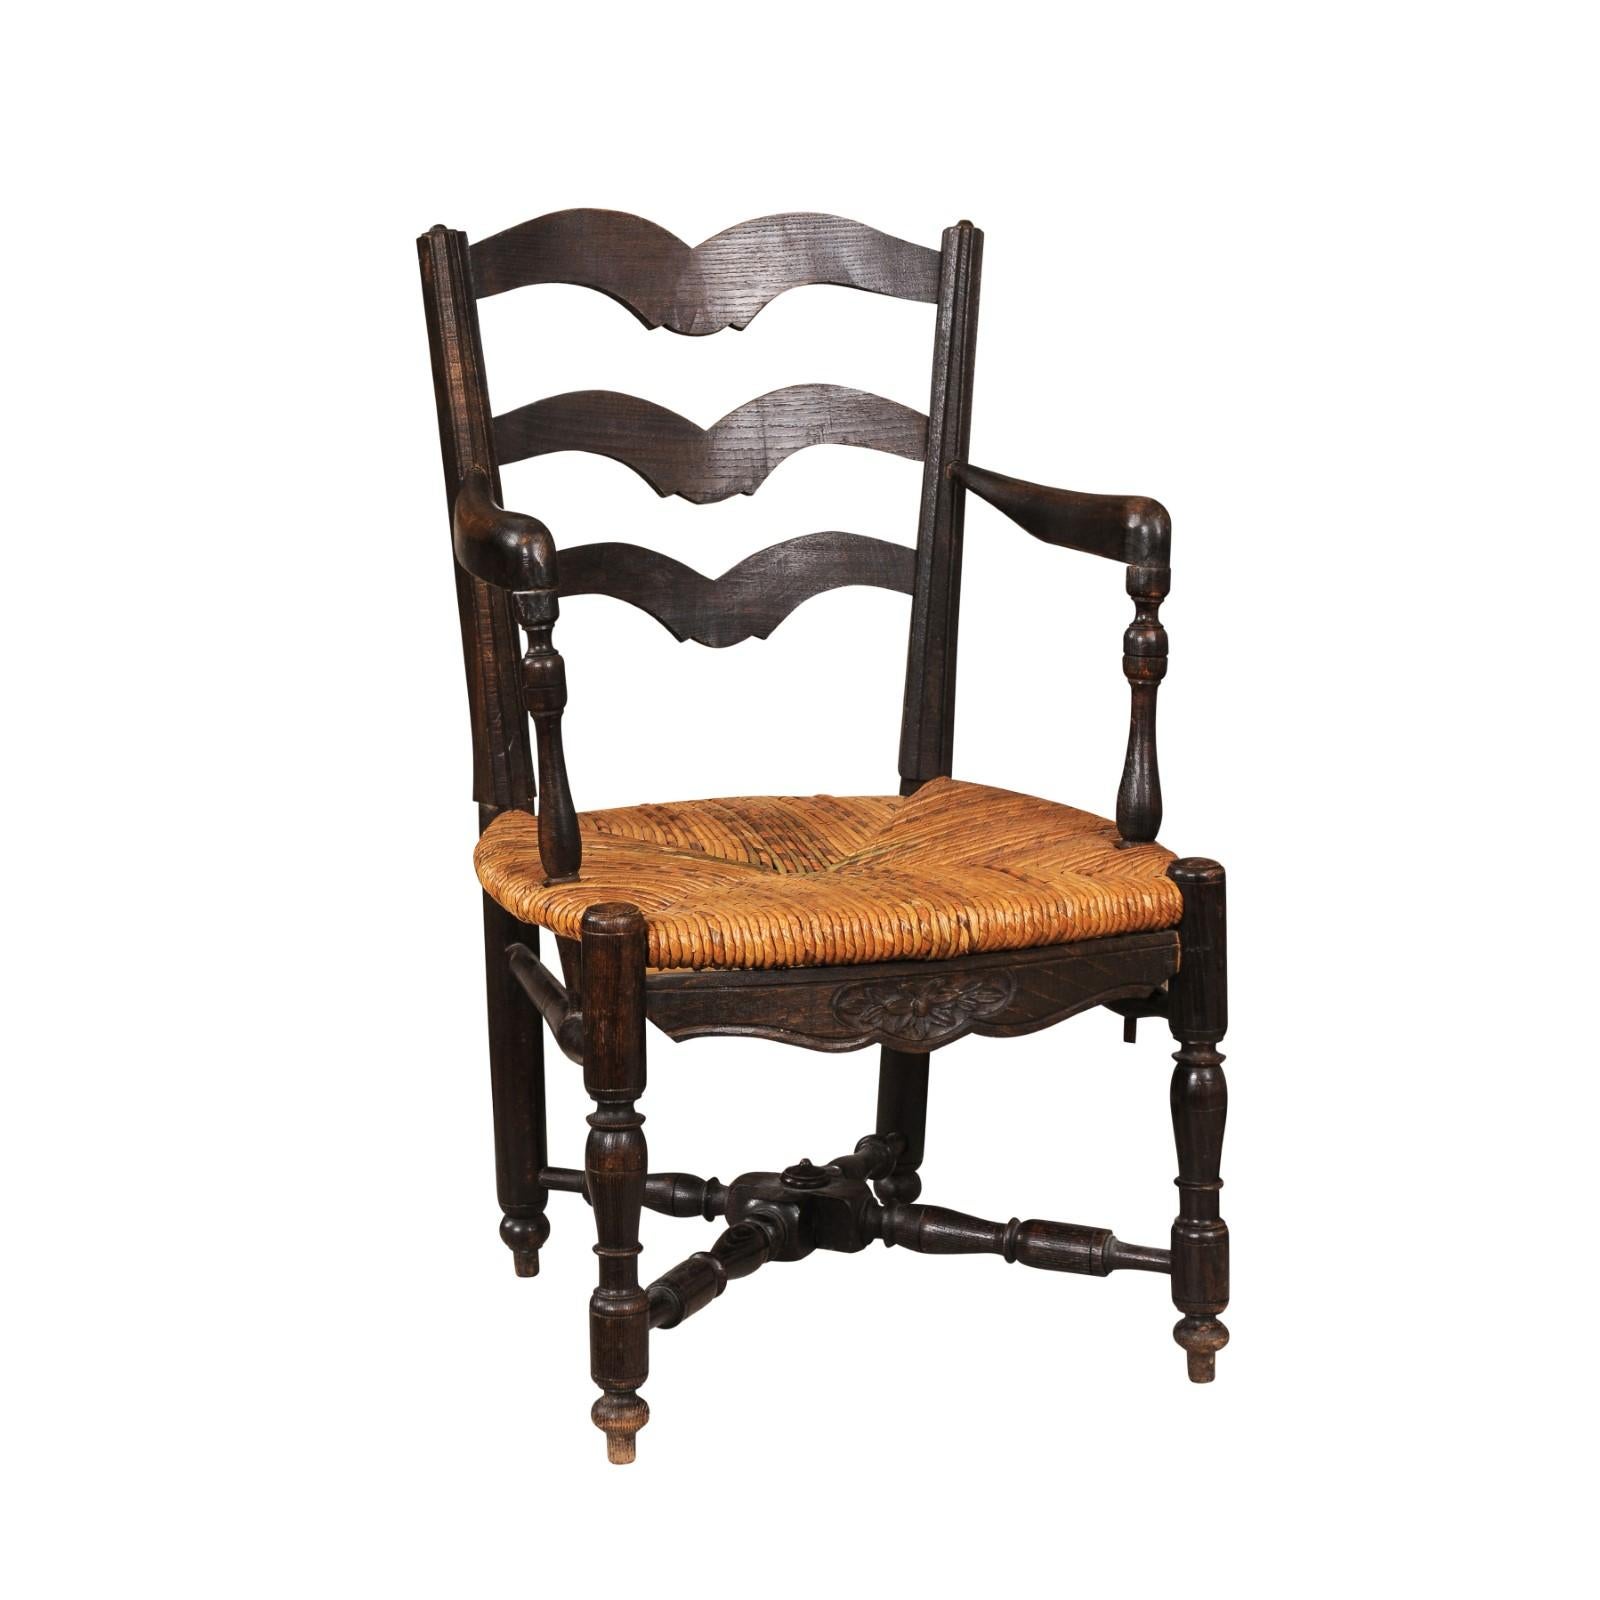 A rustic French dark oak child's chair from the 19th century with carved ladder back, open arms with turned supports, rush seat, carved apron and turned legs with cross stretcher. Introduce a touch of rustic charm to your home with this charming